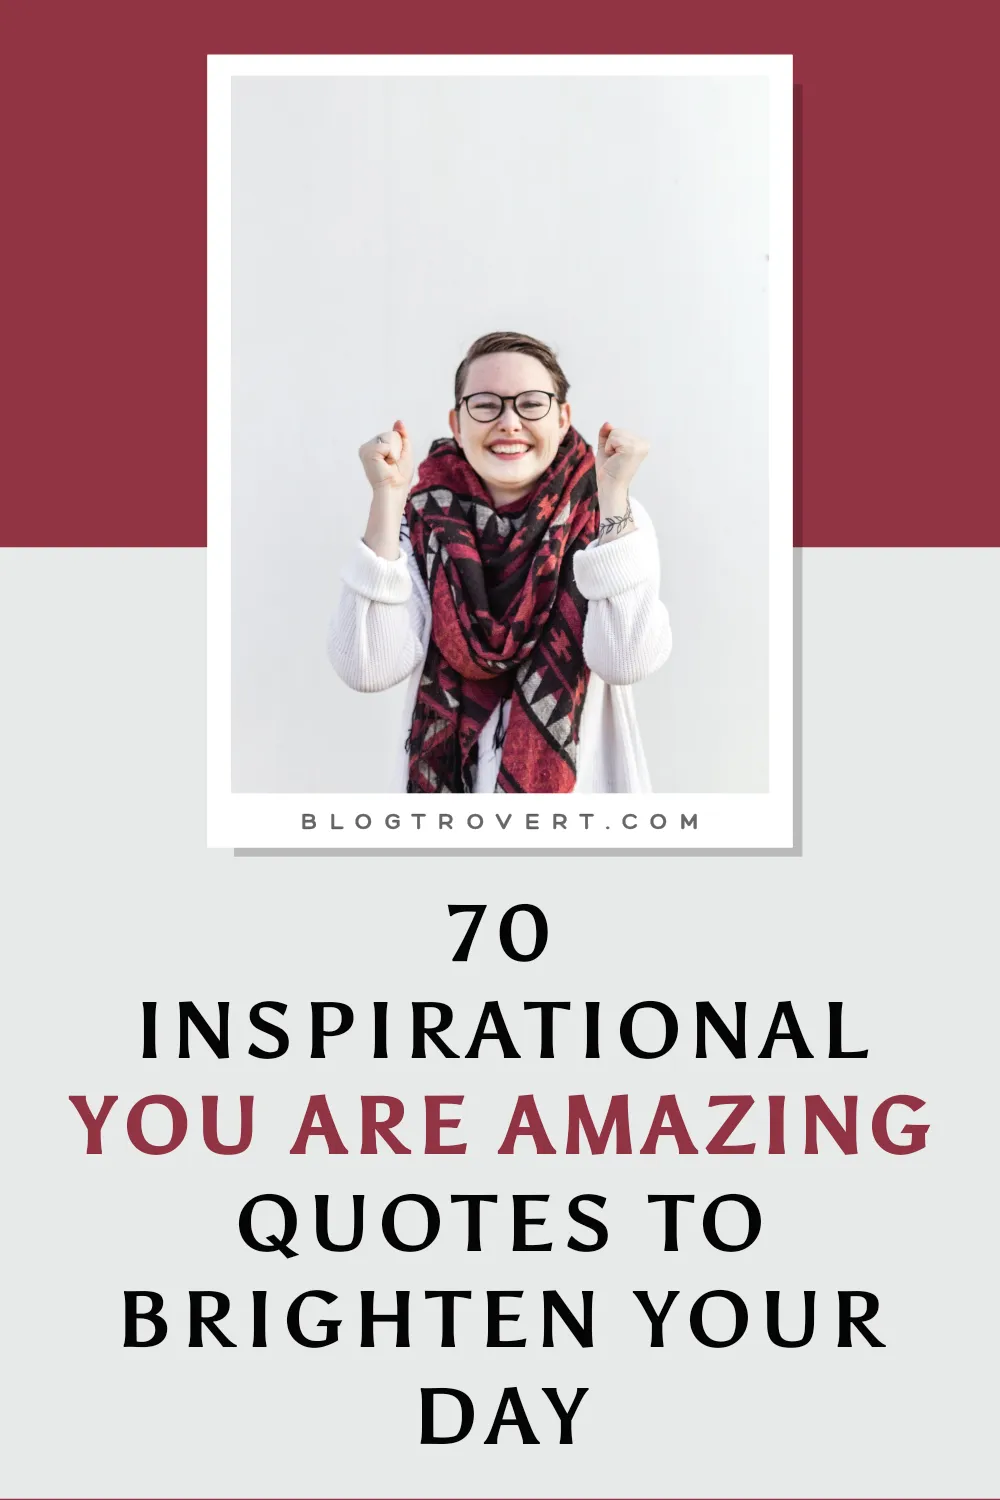 70 inspirational you are amazing quotes to Brighten Your Day 2